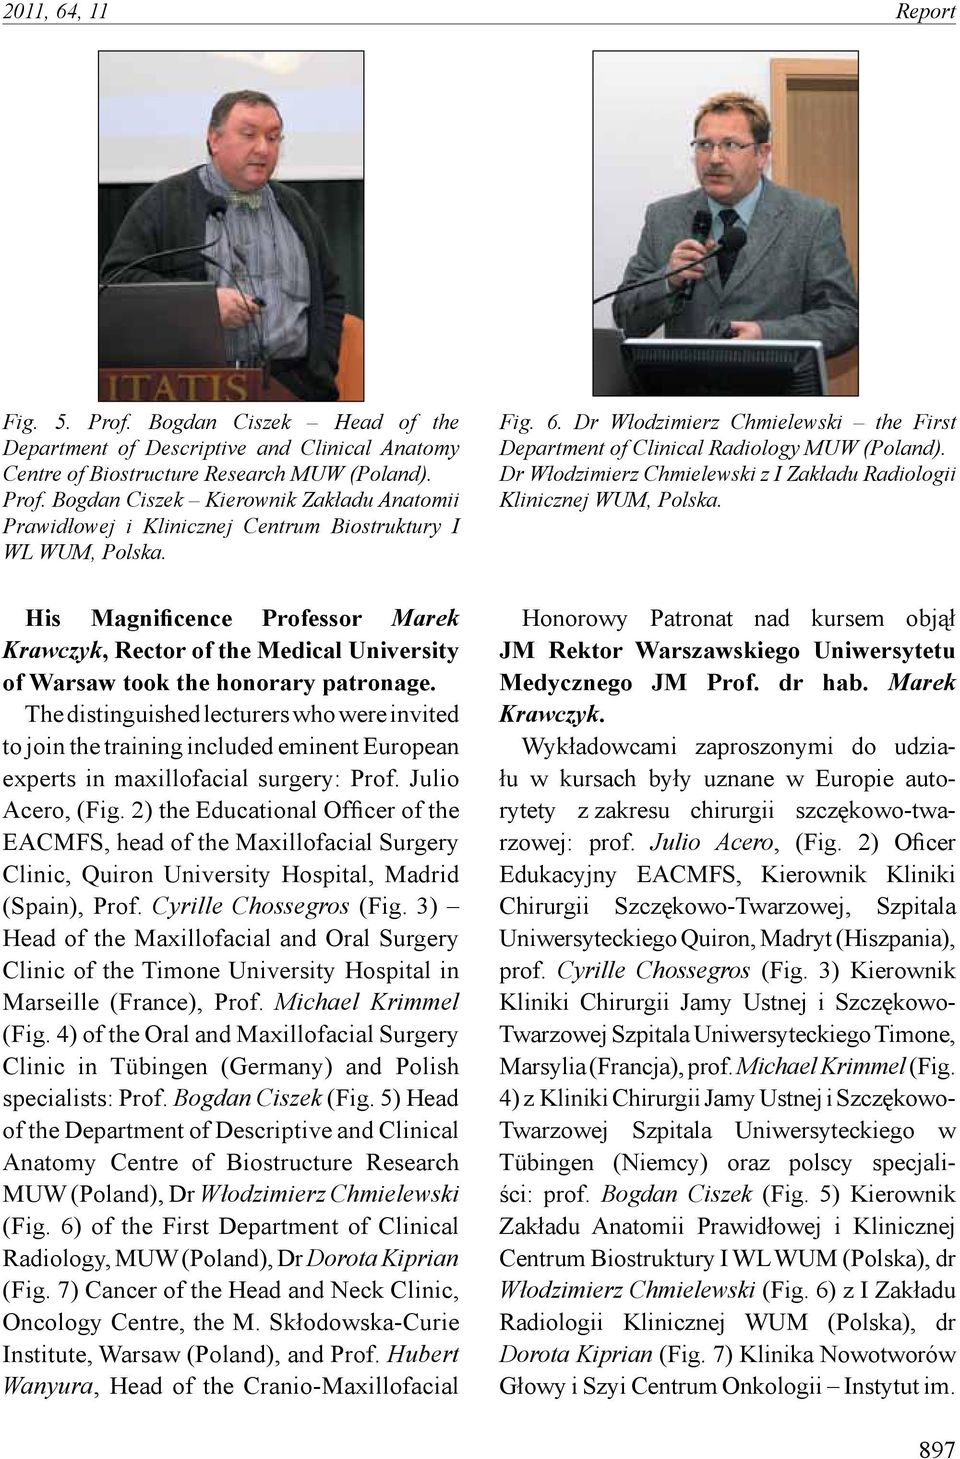 His Magnificence Professor Marek Krawczyk, Rector of the Medical University of Warsaw took the honorary patronage.